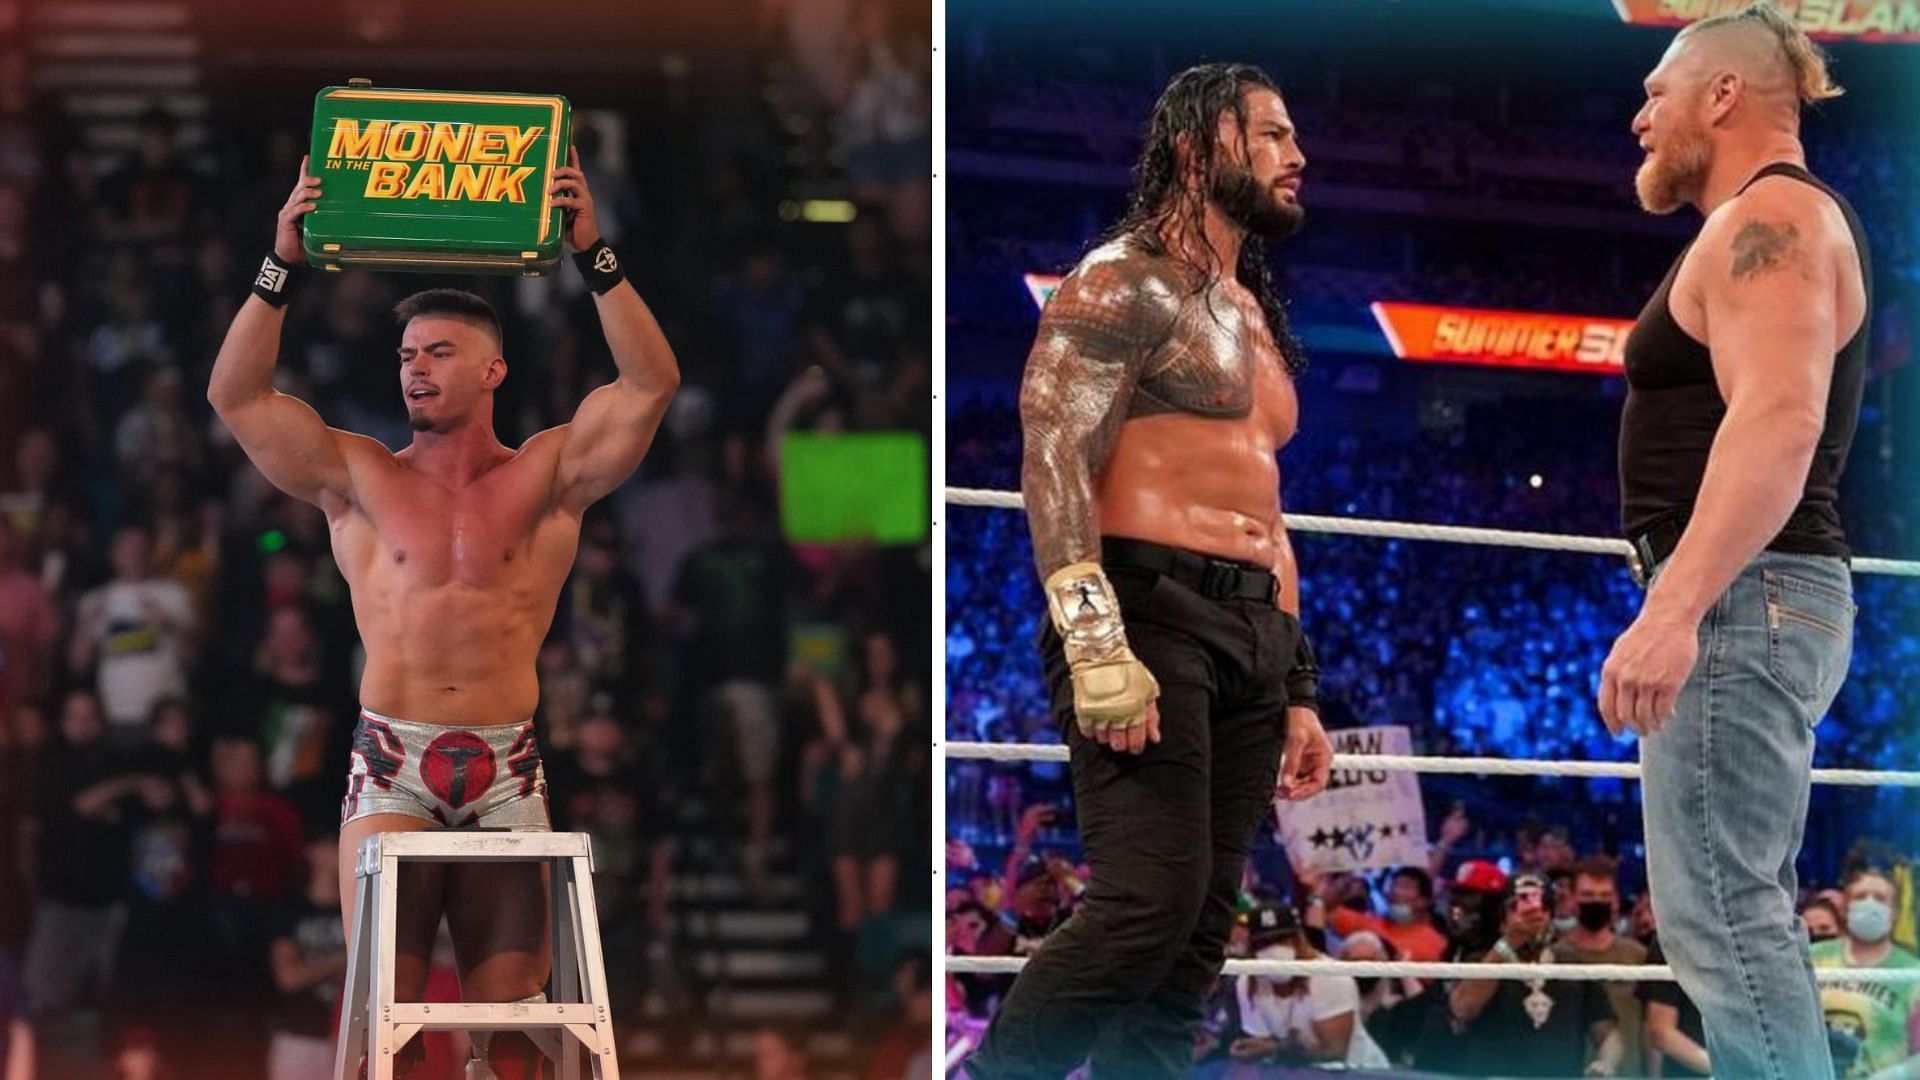 Should Theory cash in at SummerSlam or not?